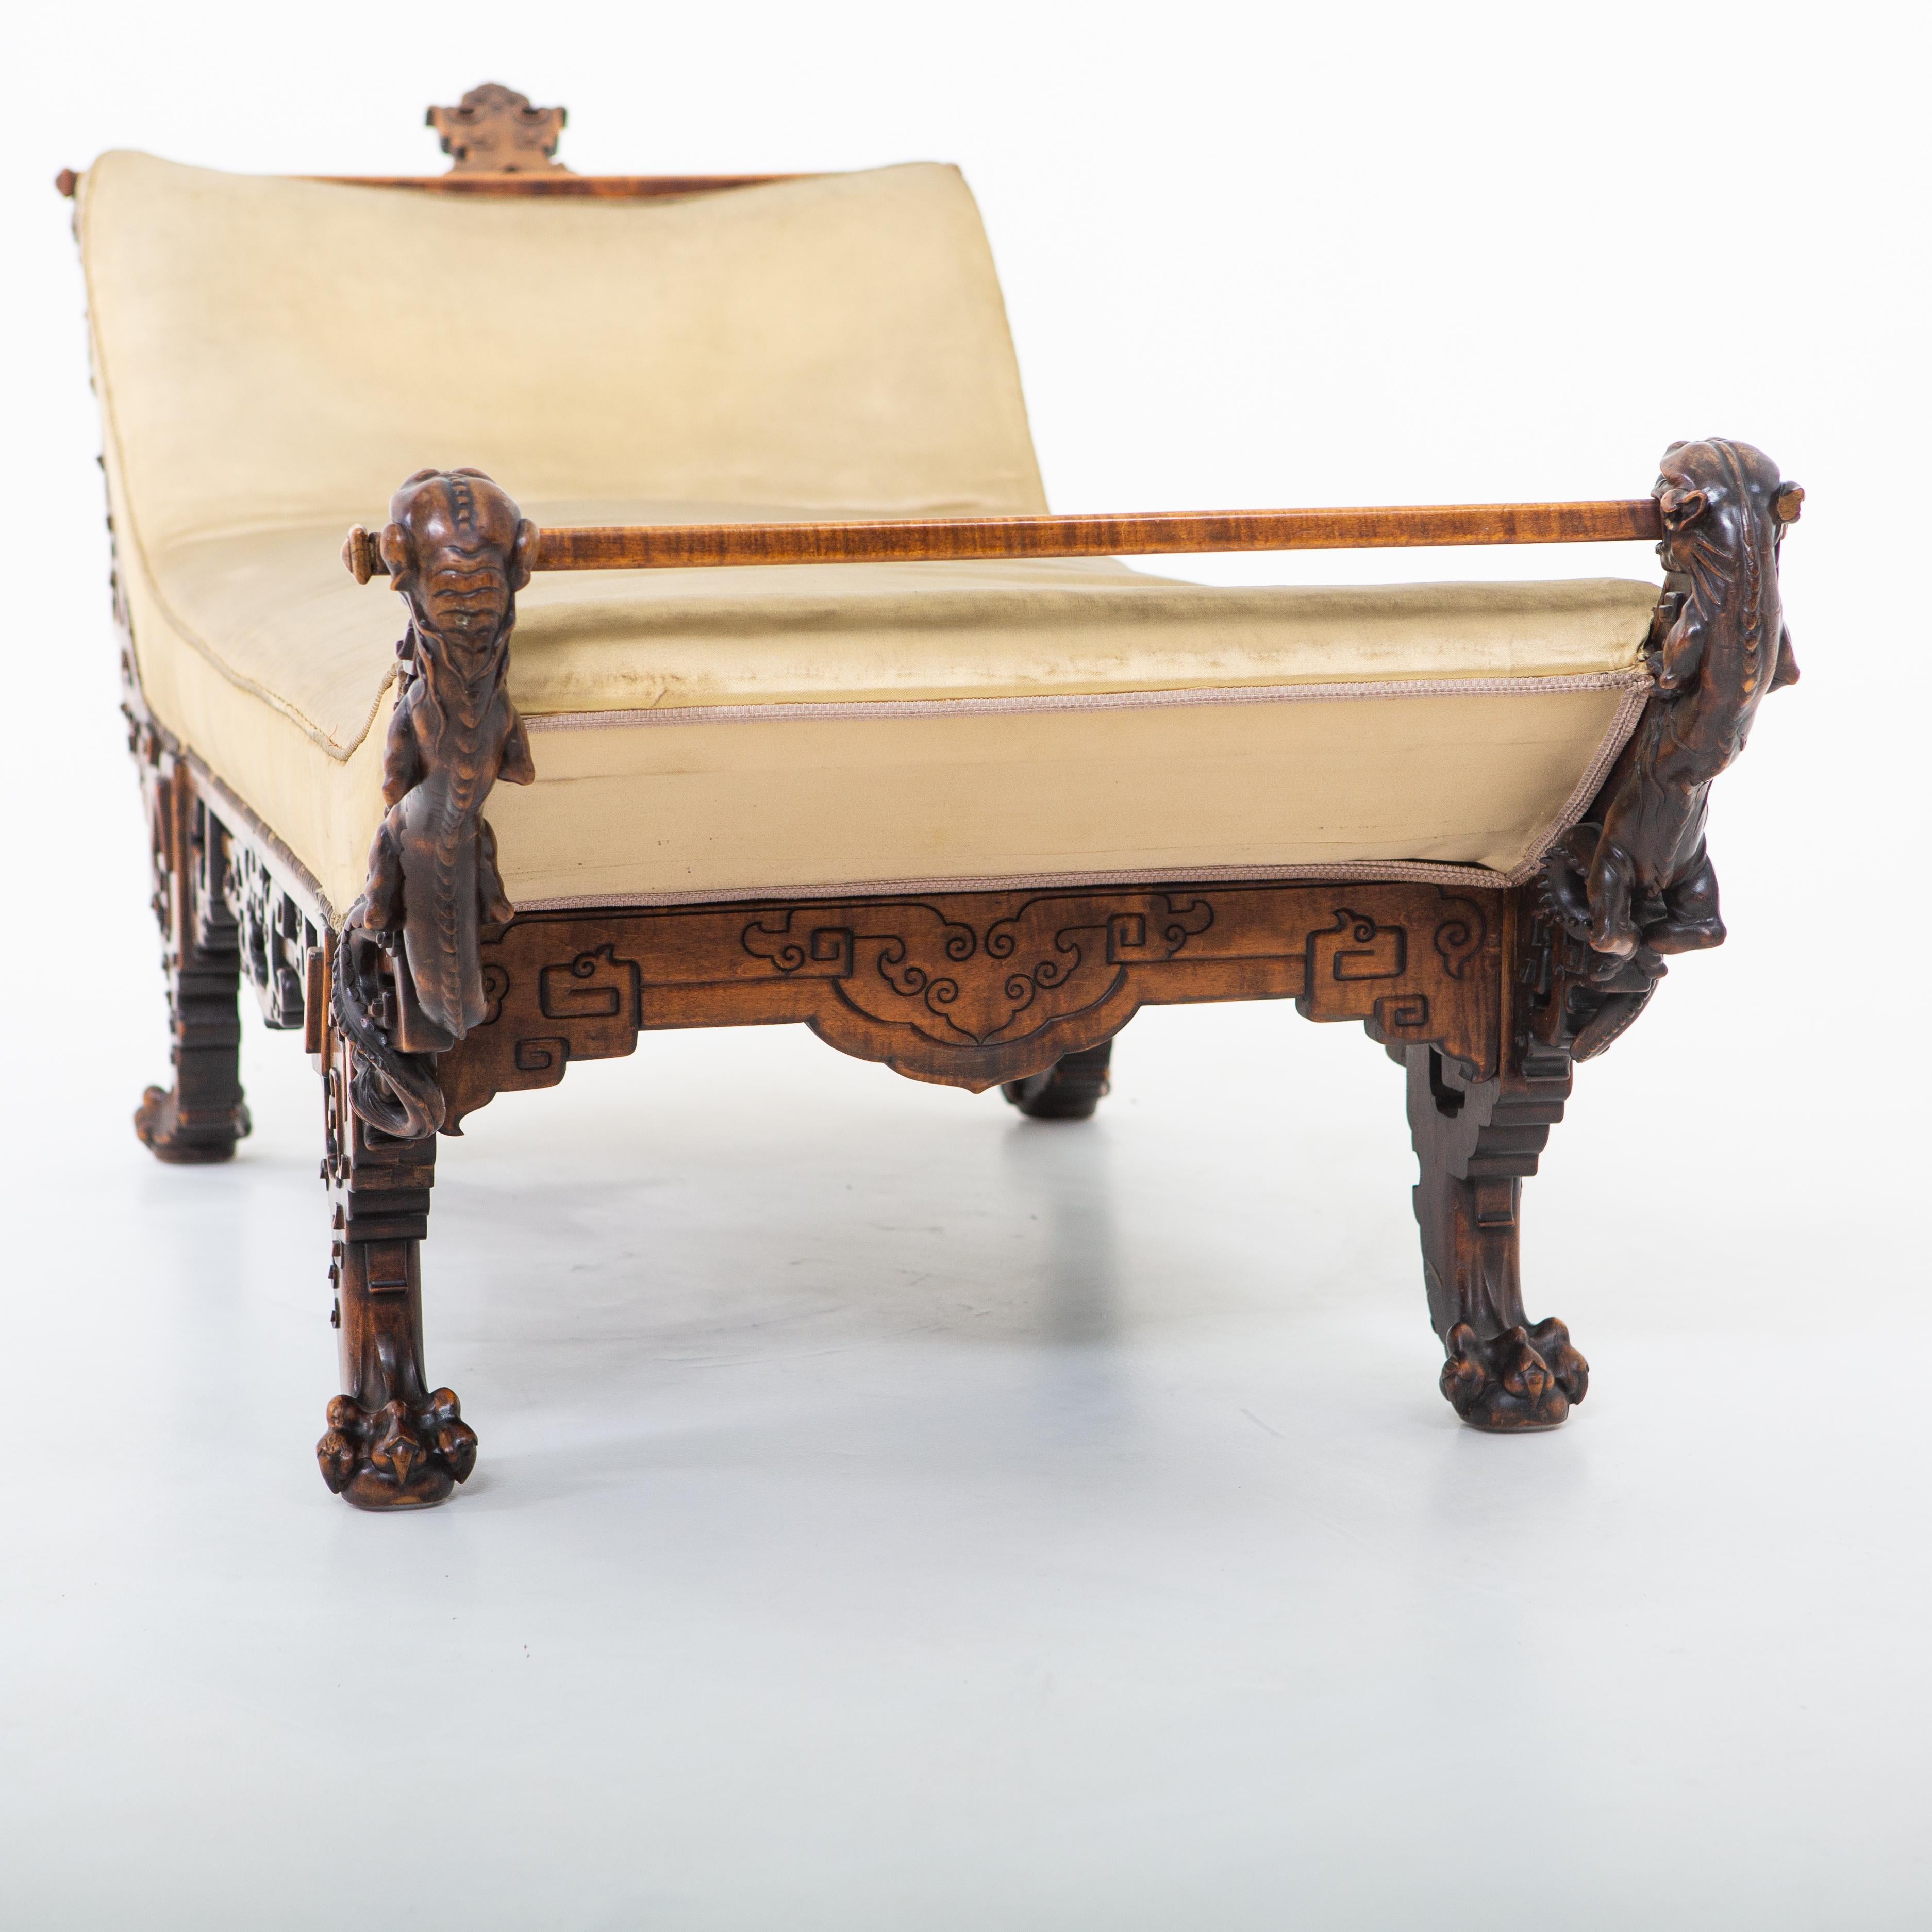 Asian-style chaise-longue or recliner in standing on lion paws. Unrestored original condition.